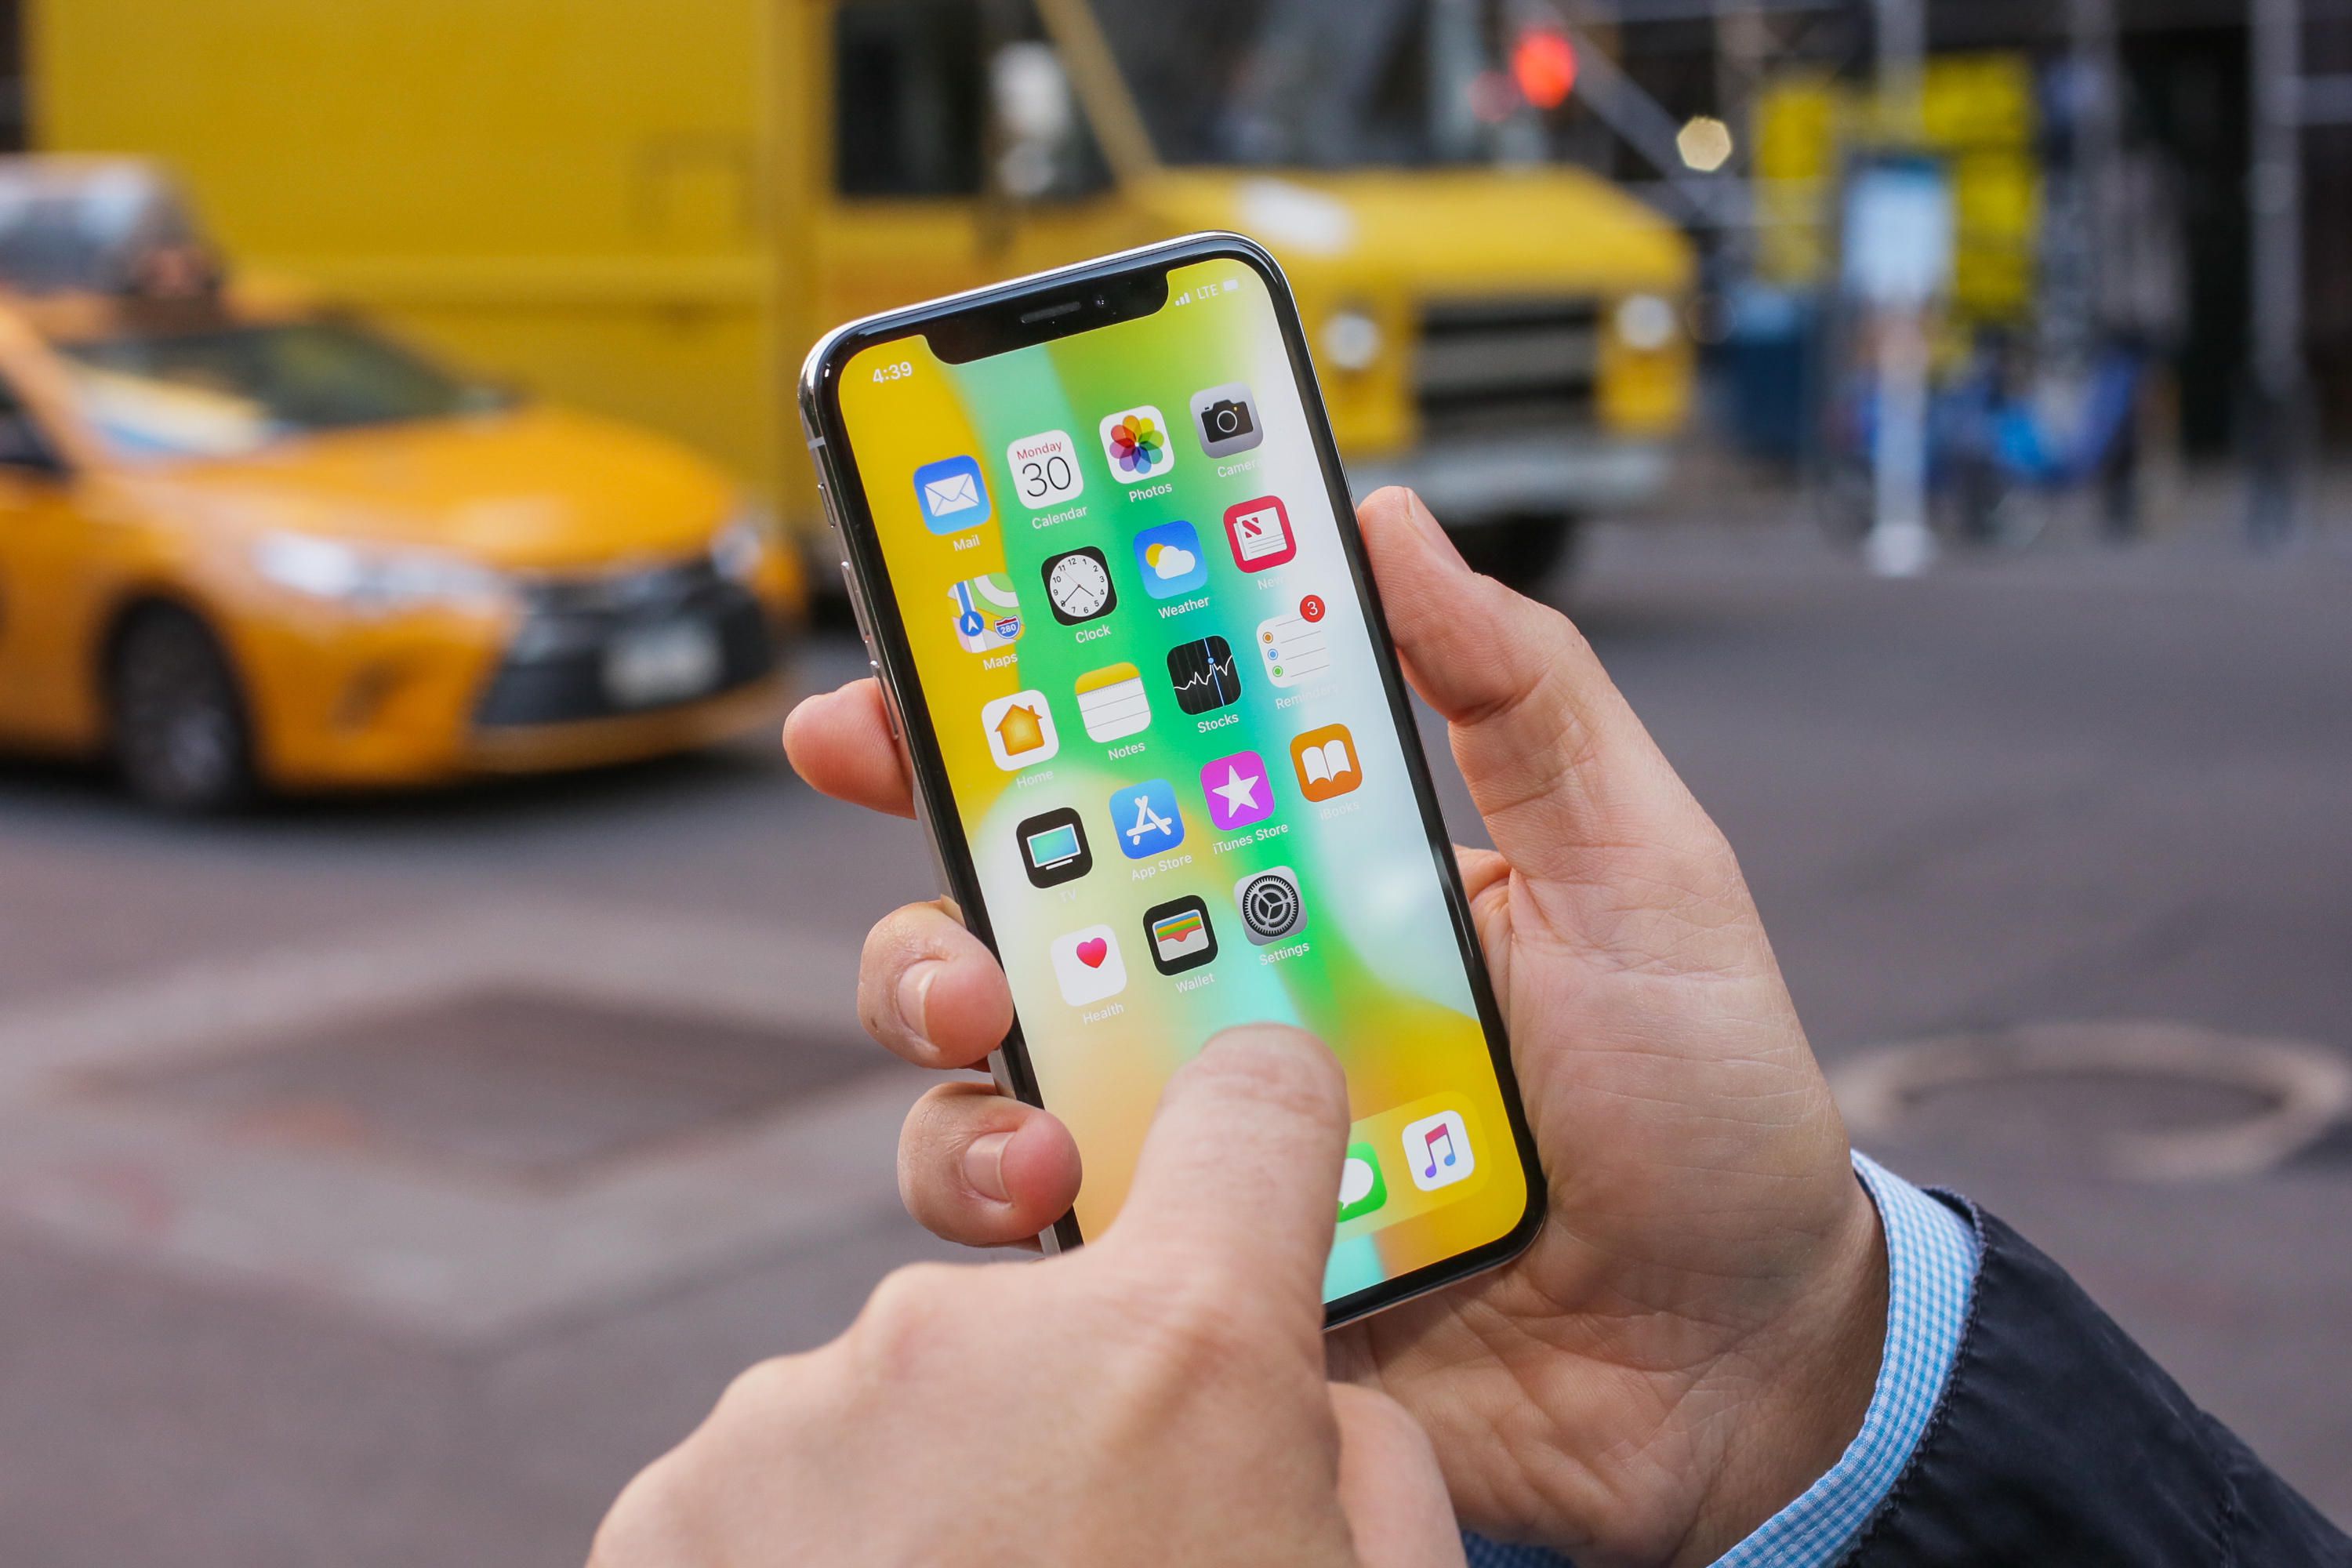 Apple will restart the production of iPhone X